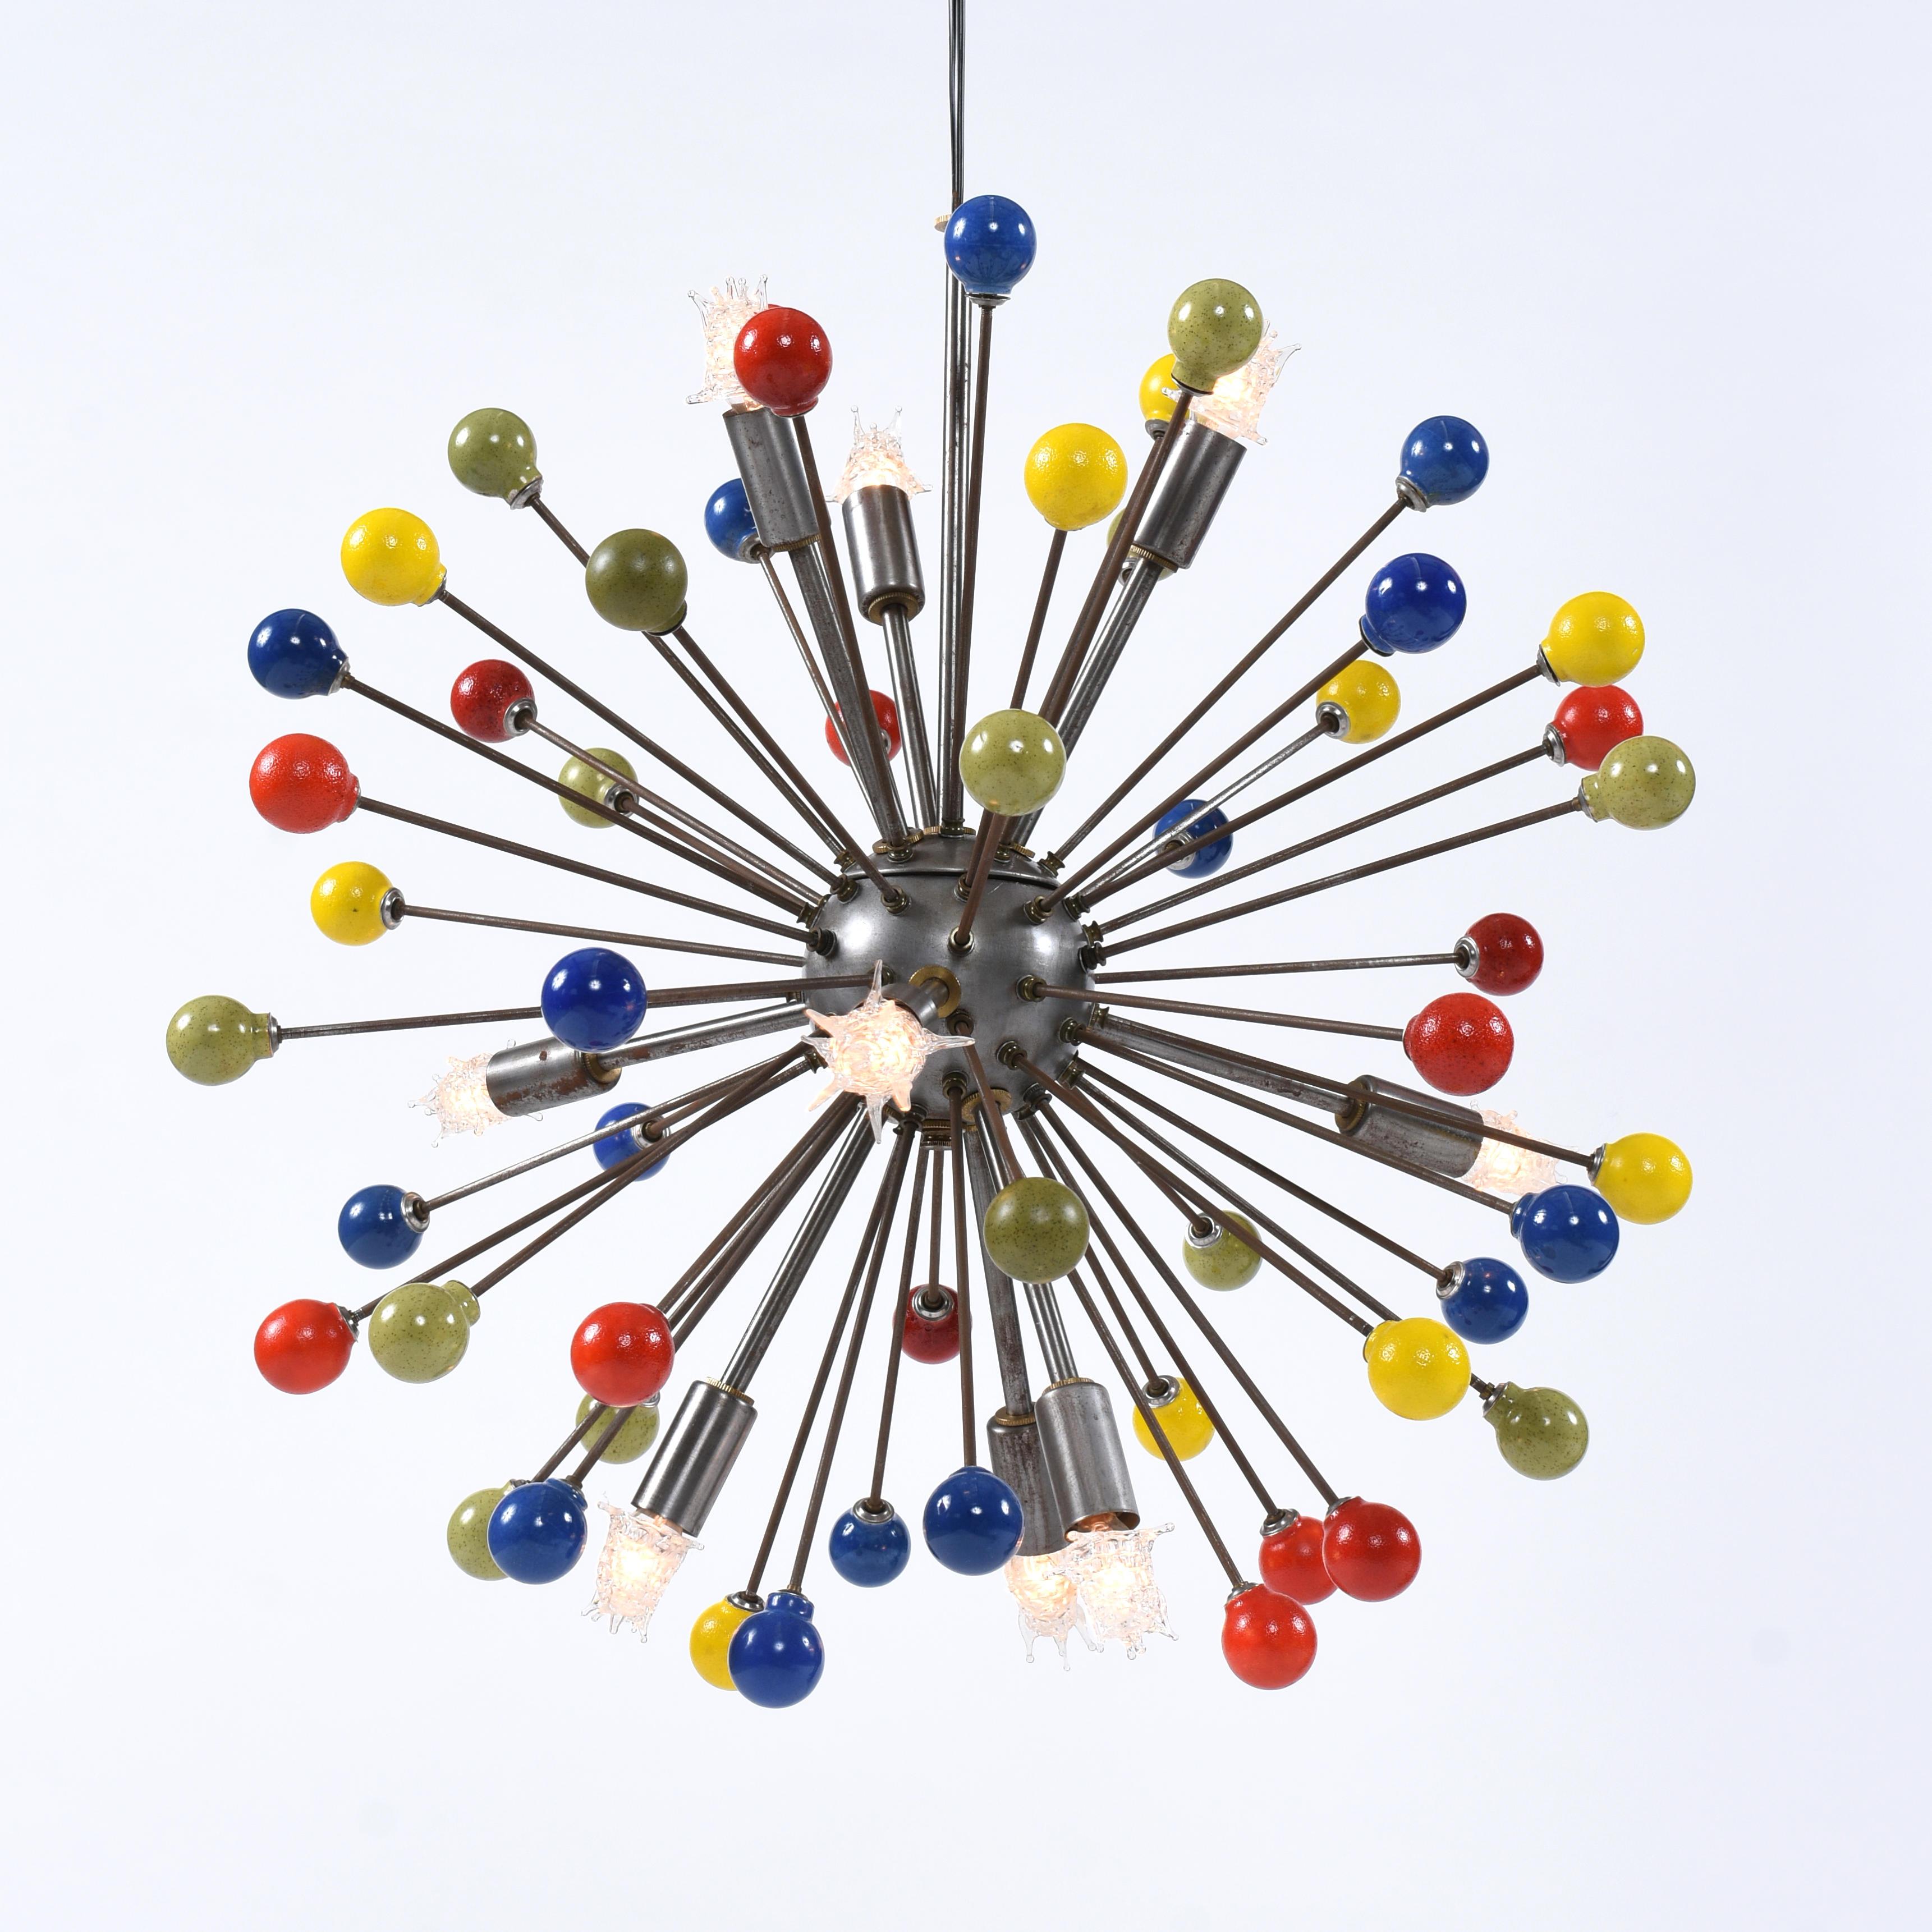 Every once in a while we get a piece that simply floors us. This is one of them. You’ve seen starburst pendant lamps before. I’m guessing that they’ve all been brass or chrome. Maybe you’ve seen the whimsical sunburst bulbs like the bulbs on this